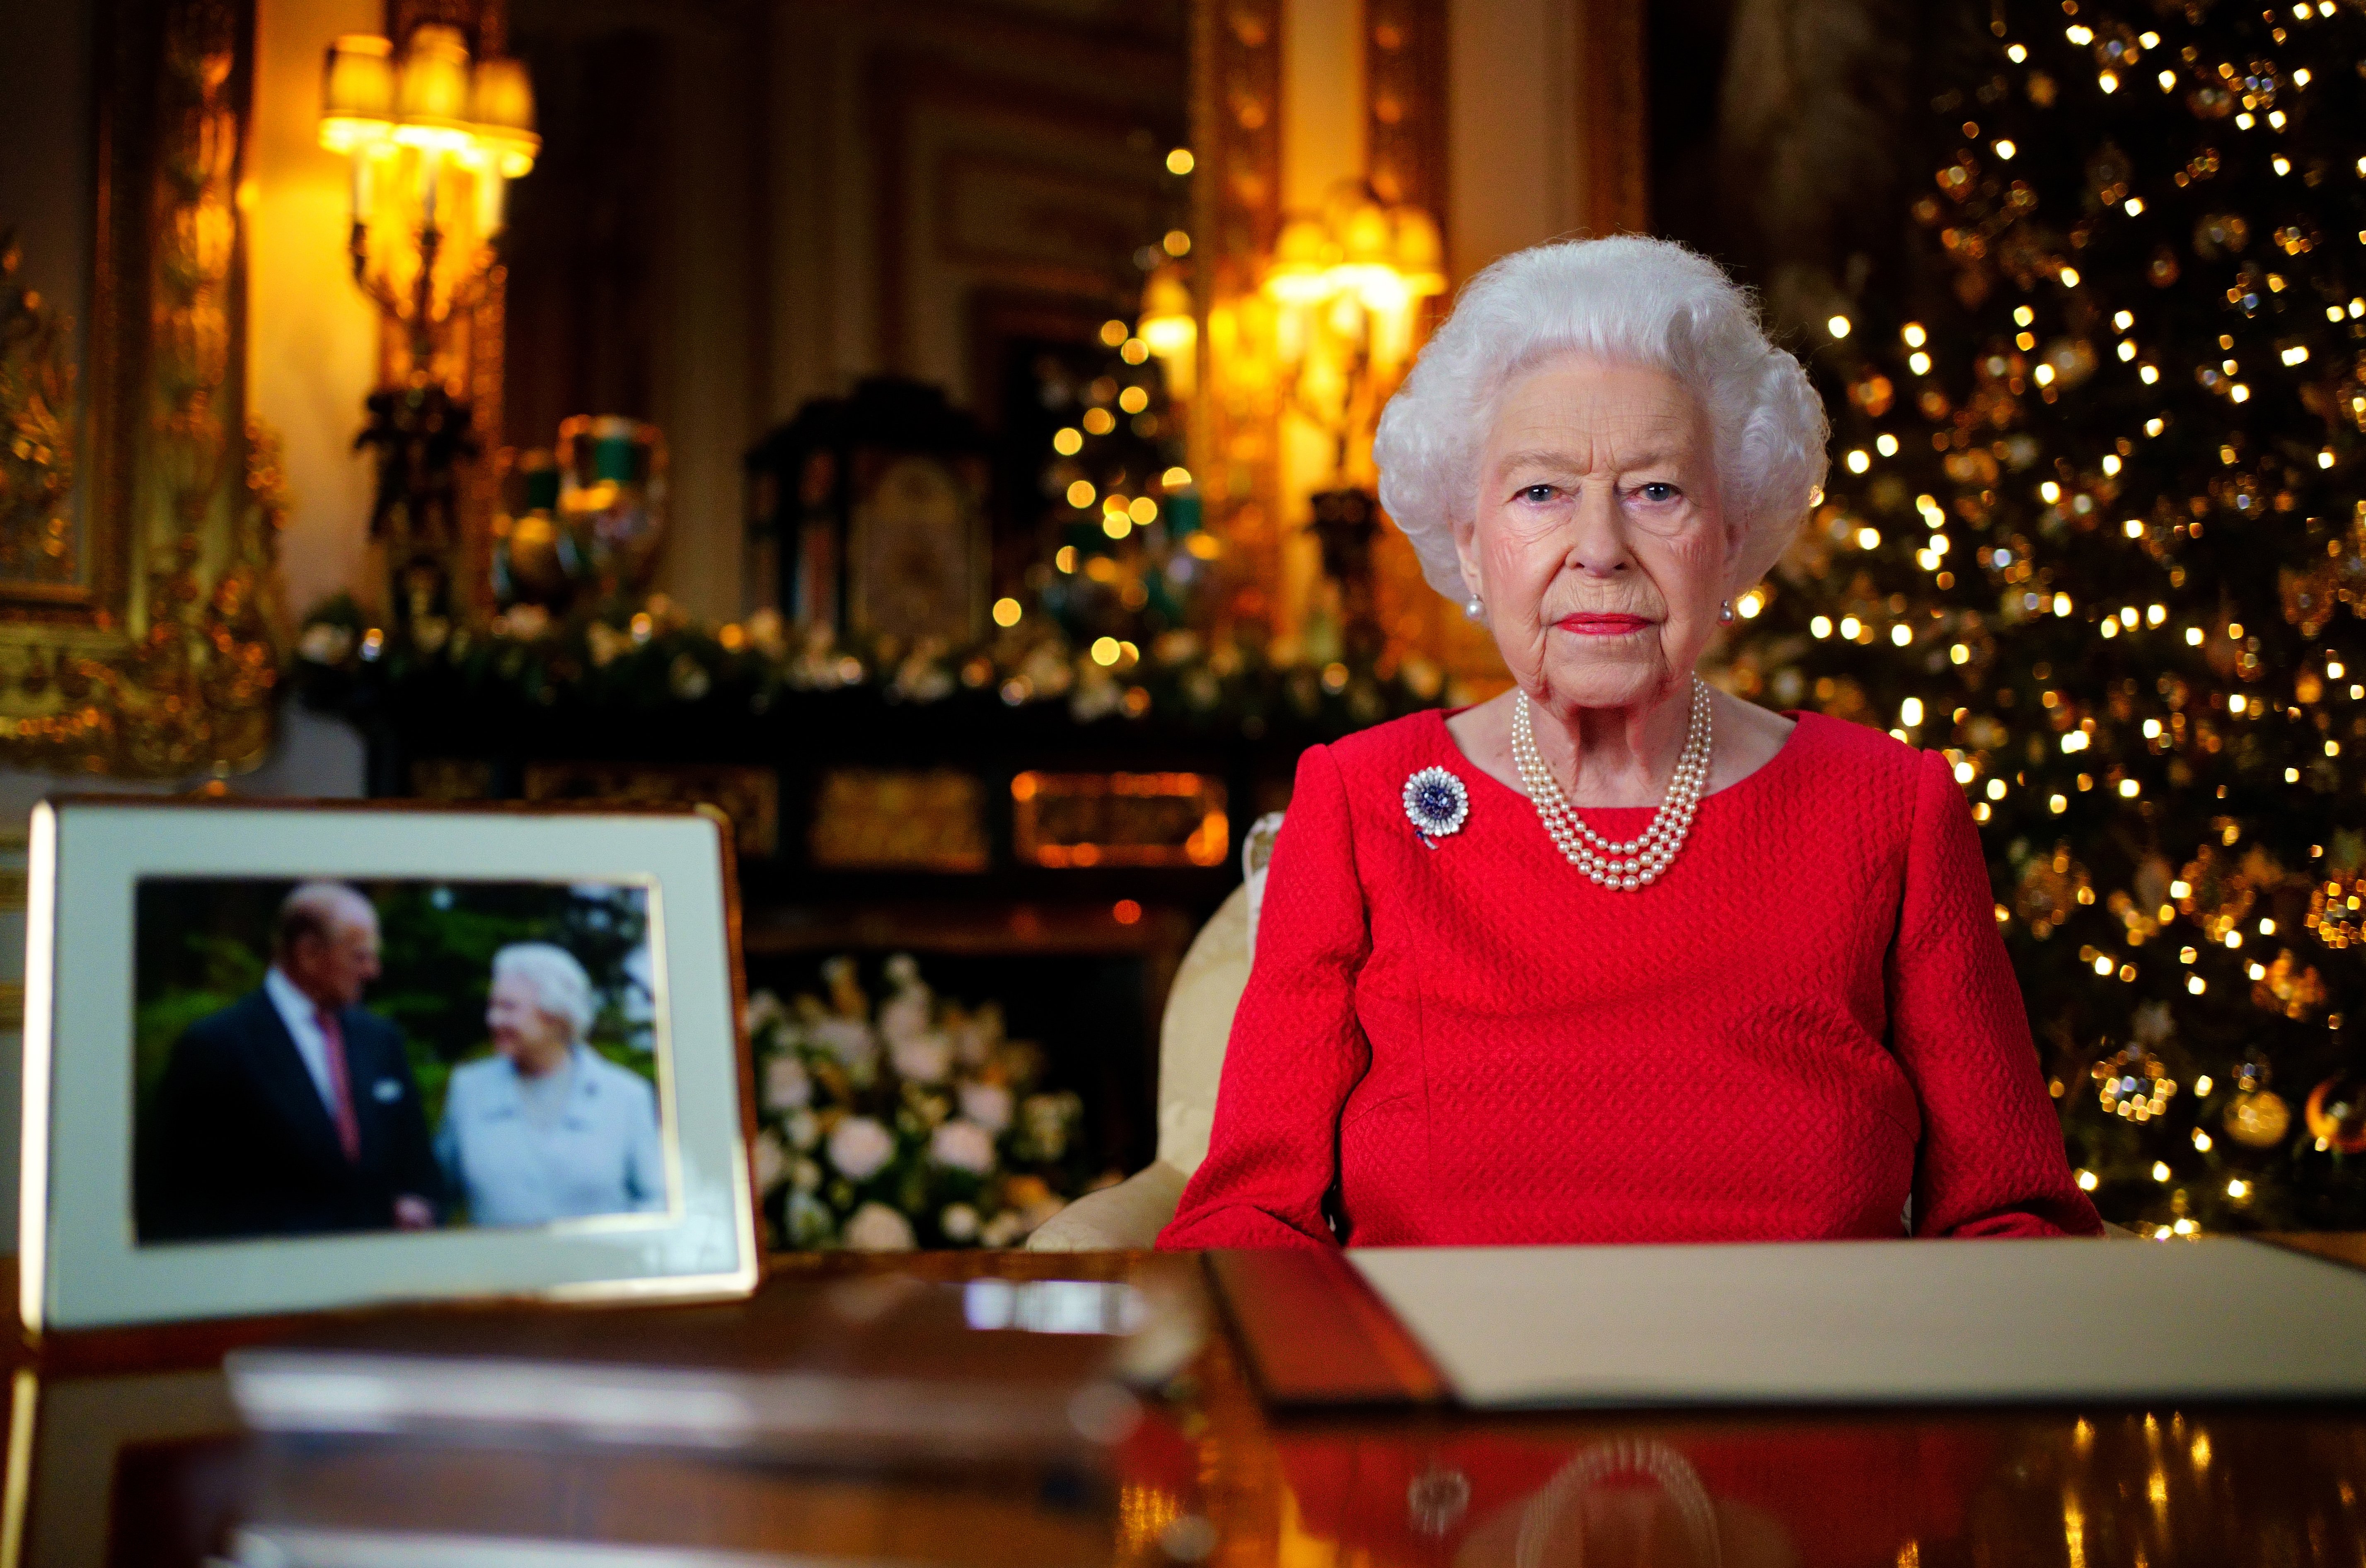  Queen Elizabeth II records her annual Christmas broadcast in the White Drawing Room at Windsor Castle on December 23, 2021 in Windsor, England | Source: Getty Images